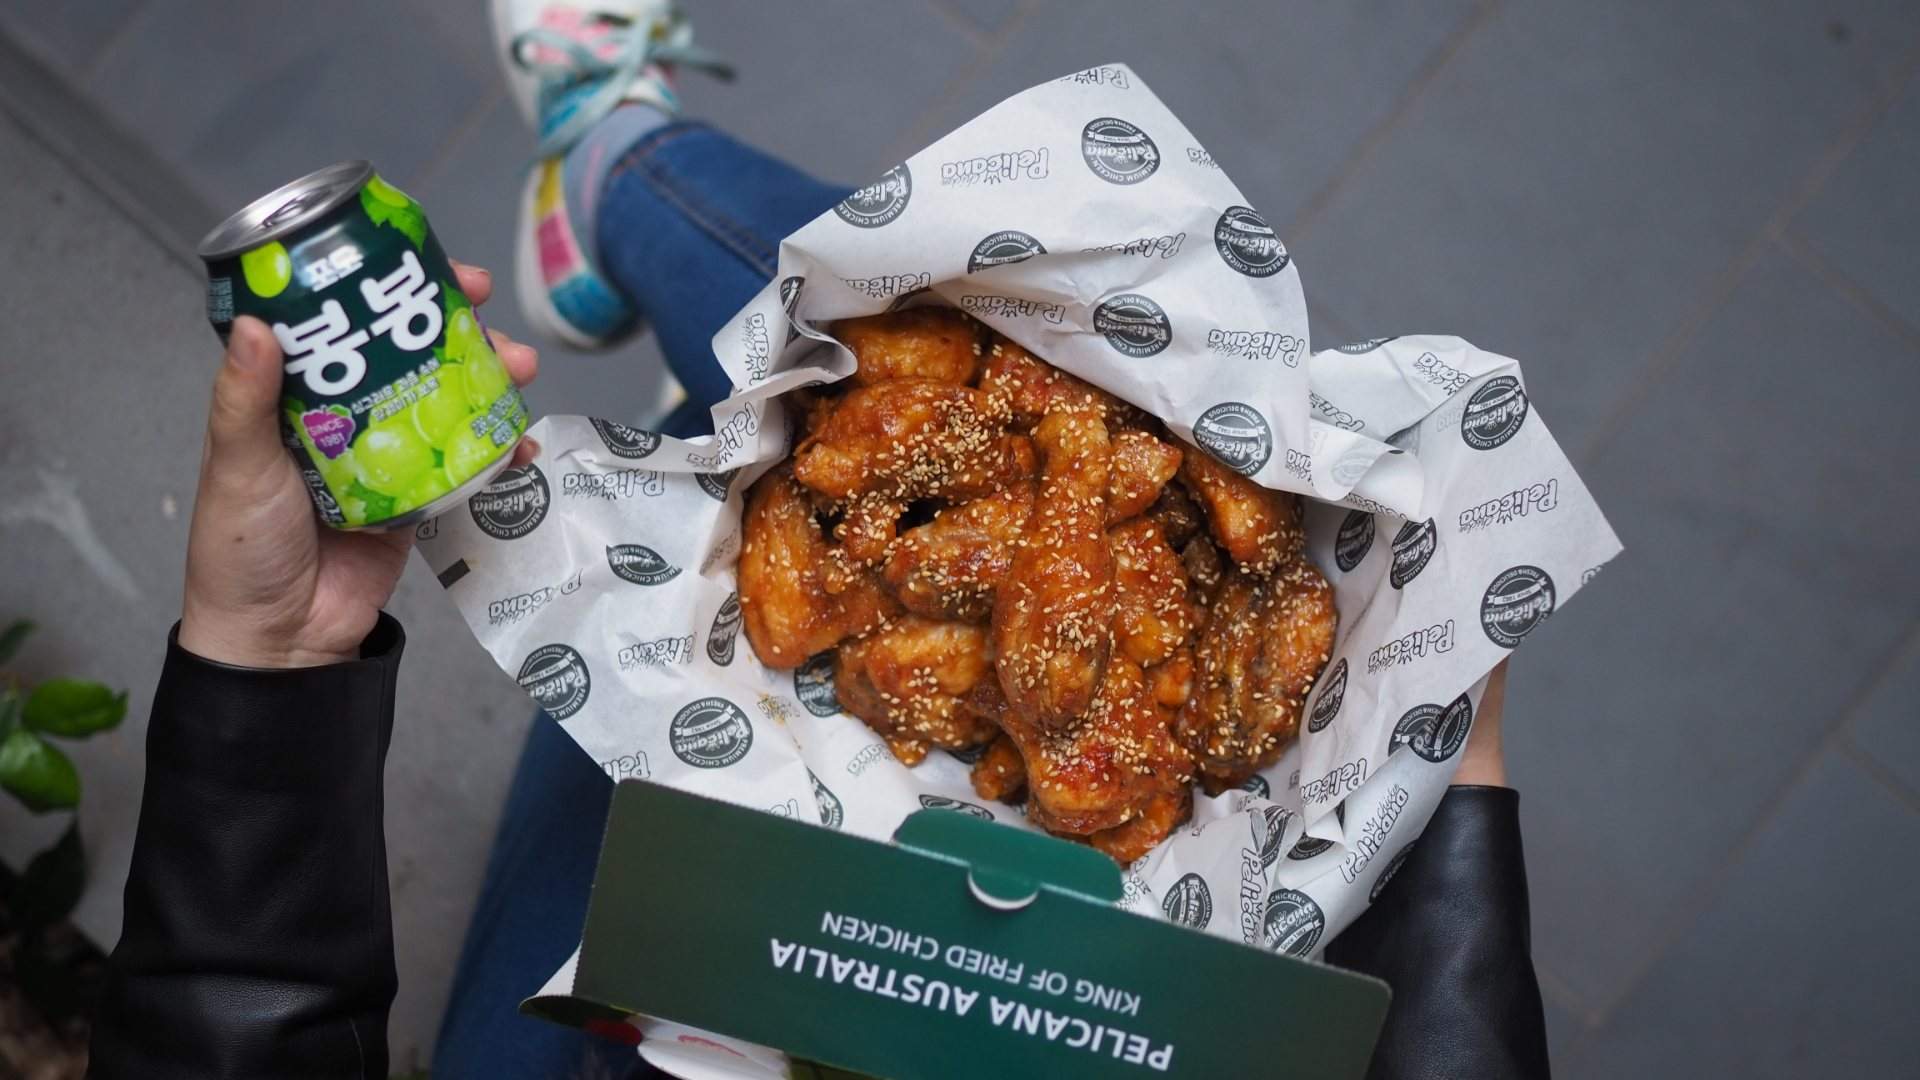 Famed Korean Fried Chicken Chain Pelicana Has Opened Its First Melbourne Store